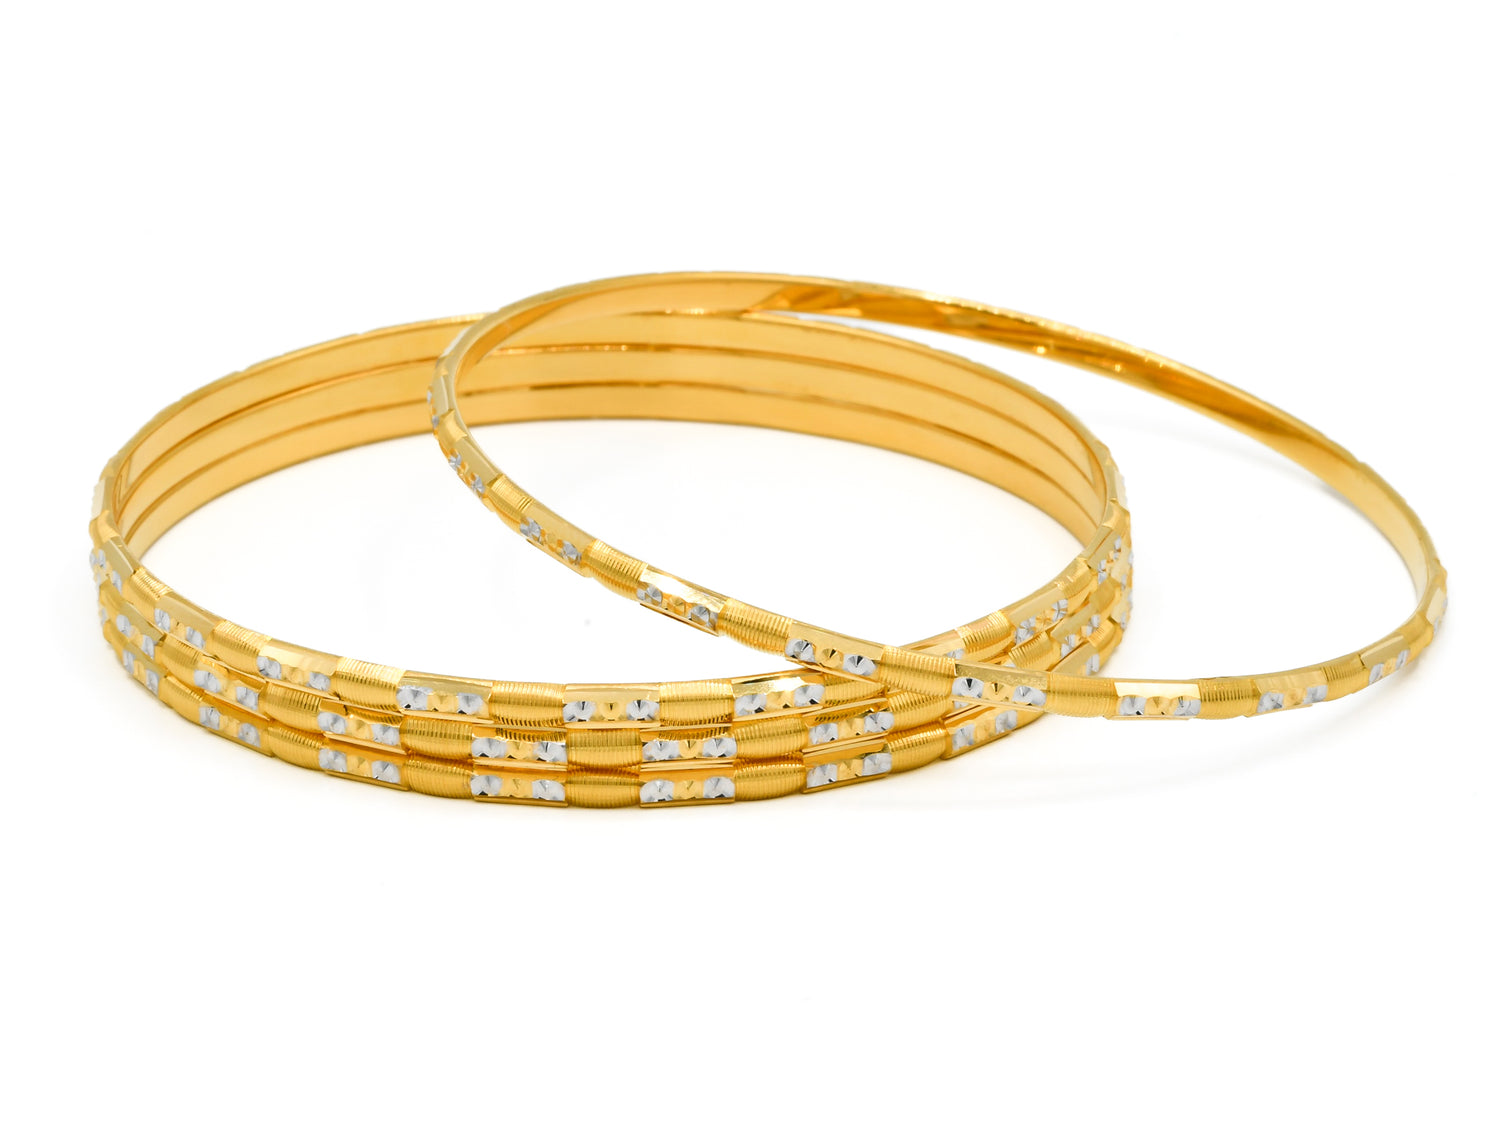 22ct Gold Two Tone 4 Piece Solid Bangle - Roop Darshan